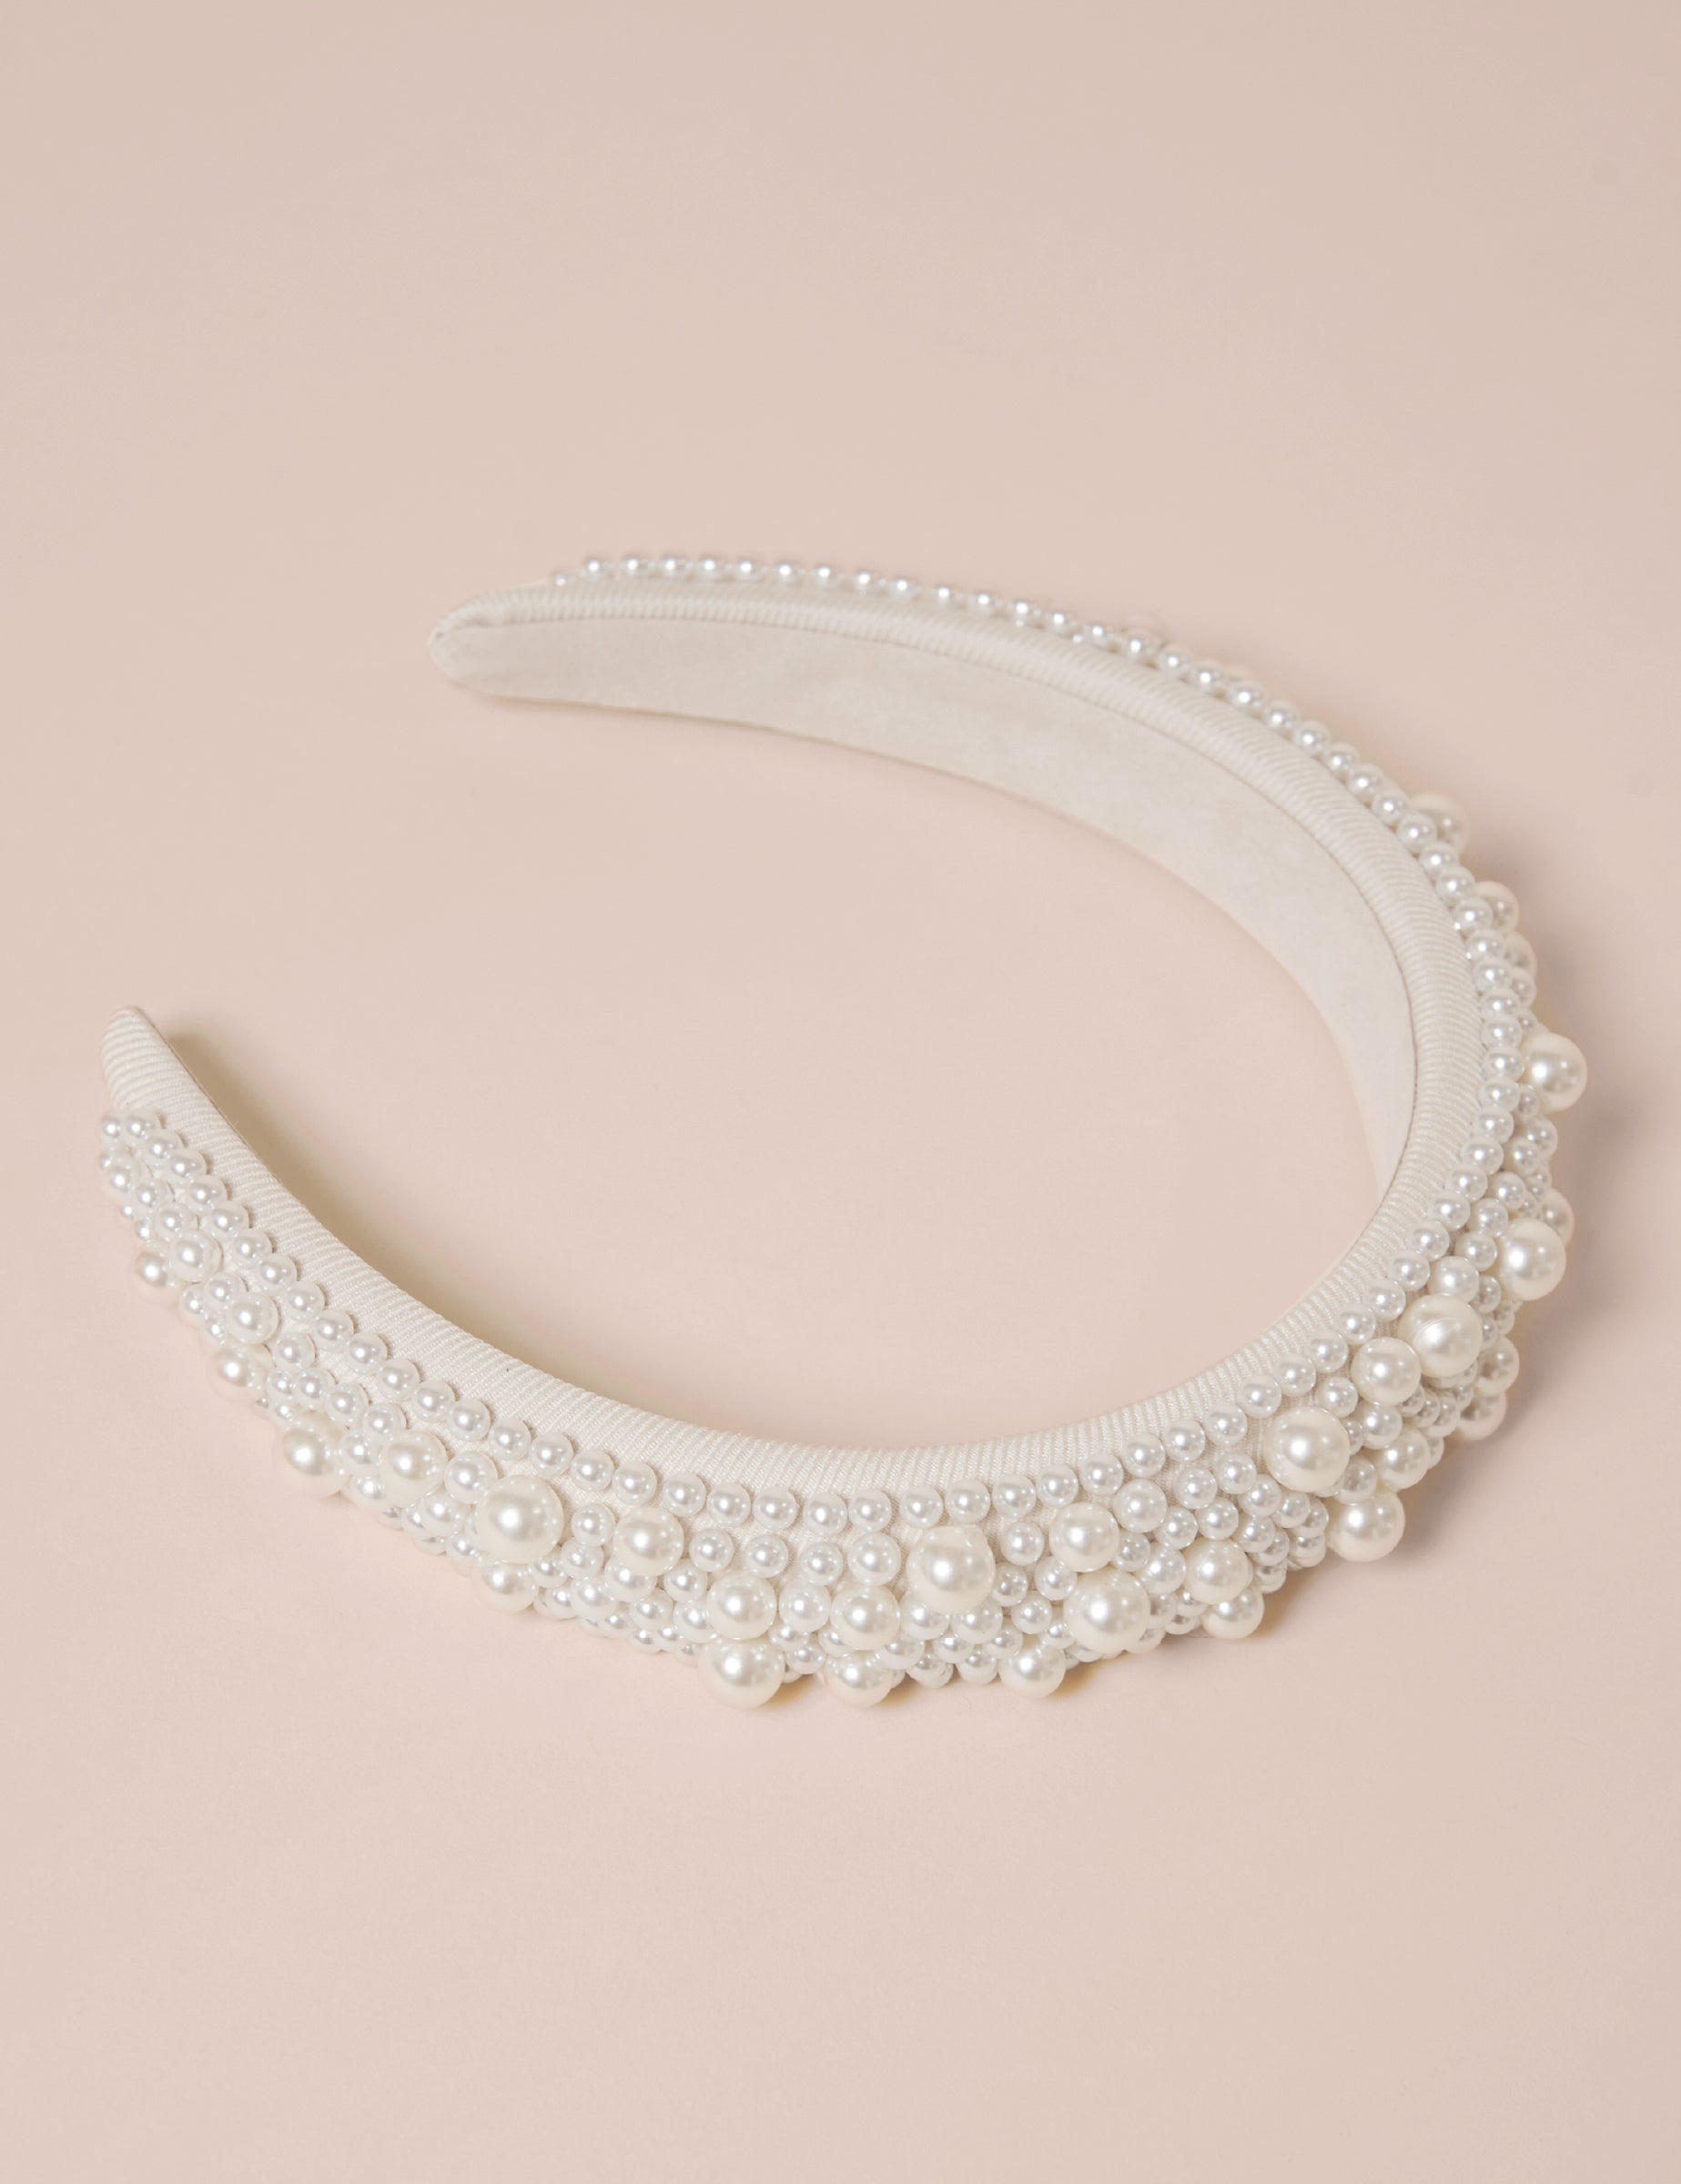 Charlotte - Large Padded White and Sparkling Silver Headband – Acute Designs